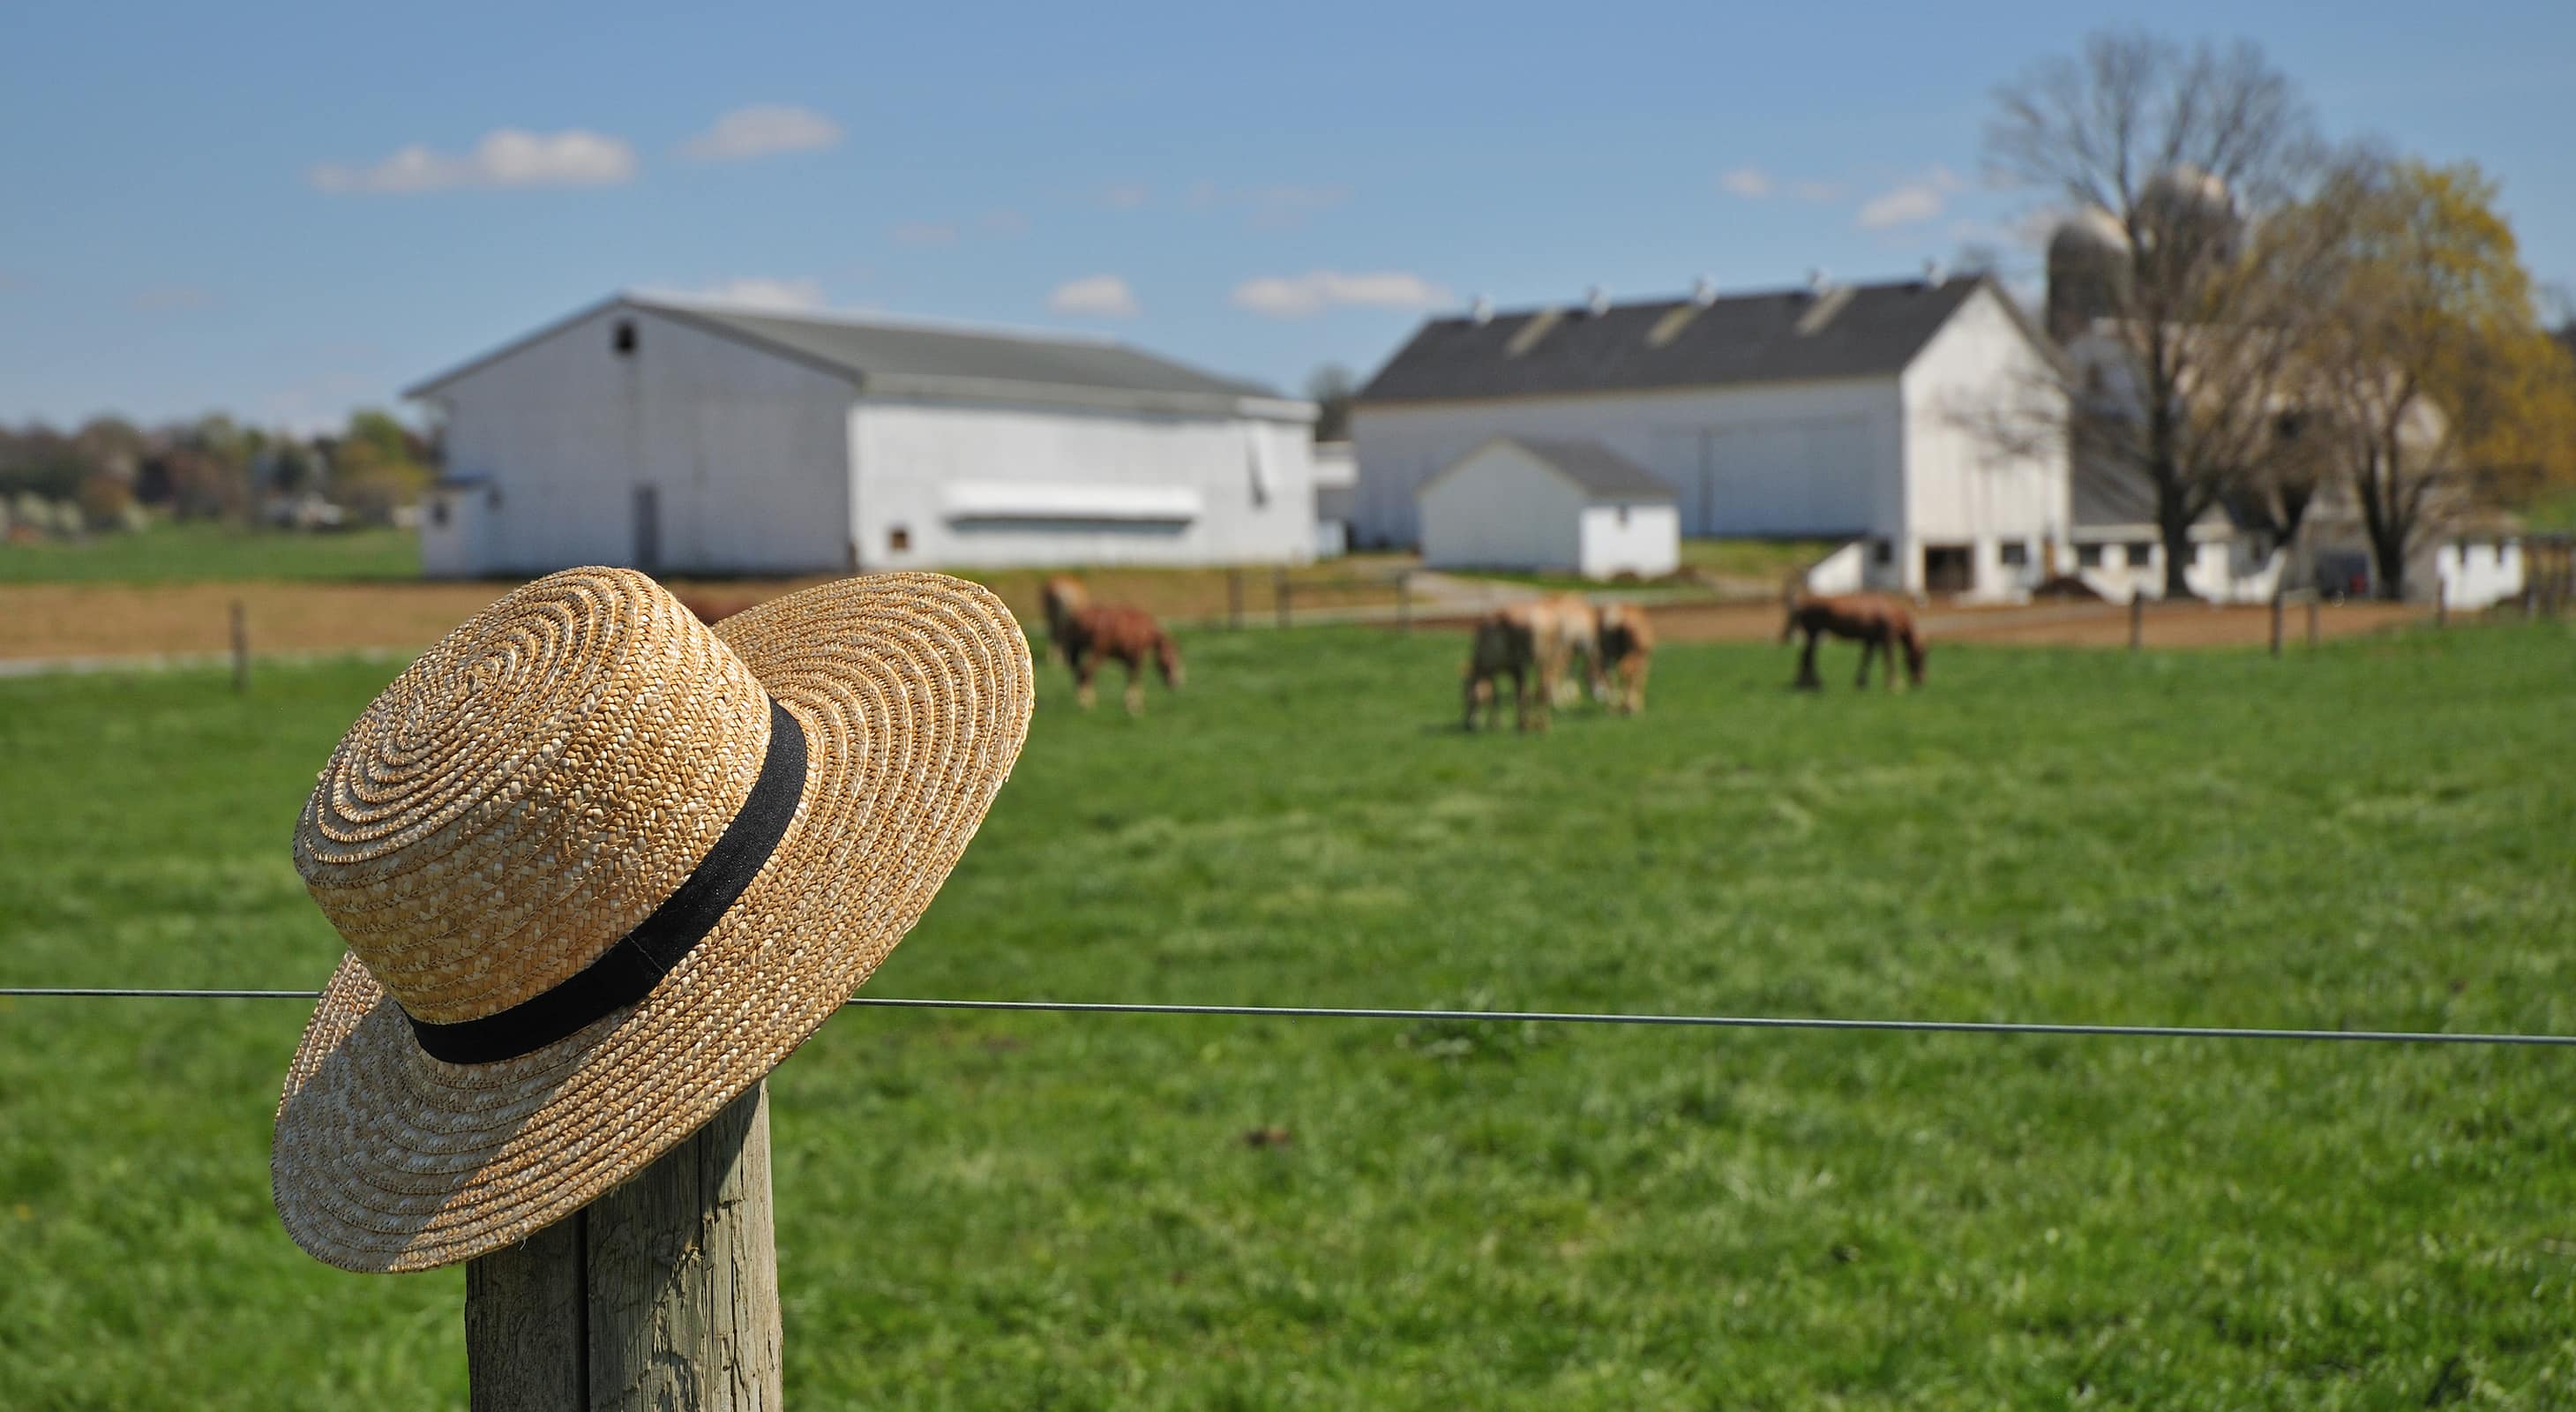 Amish farm in Lancaster County